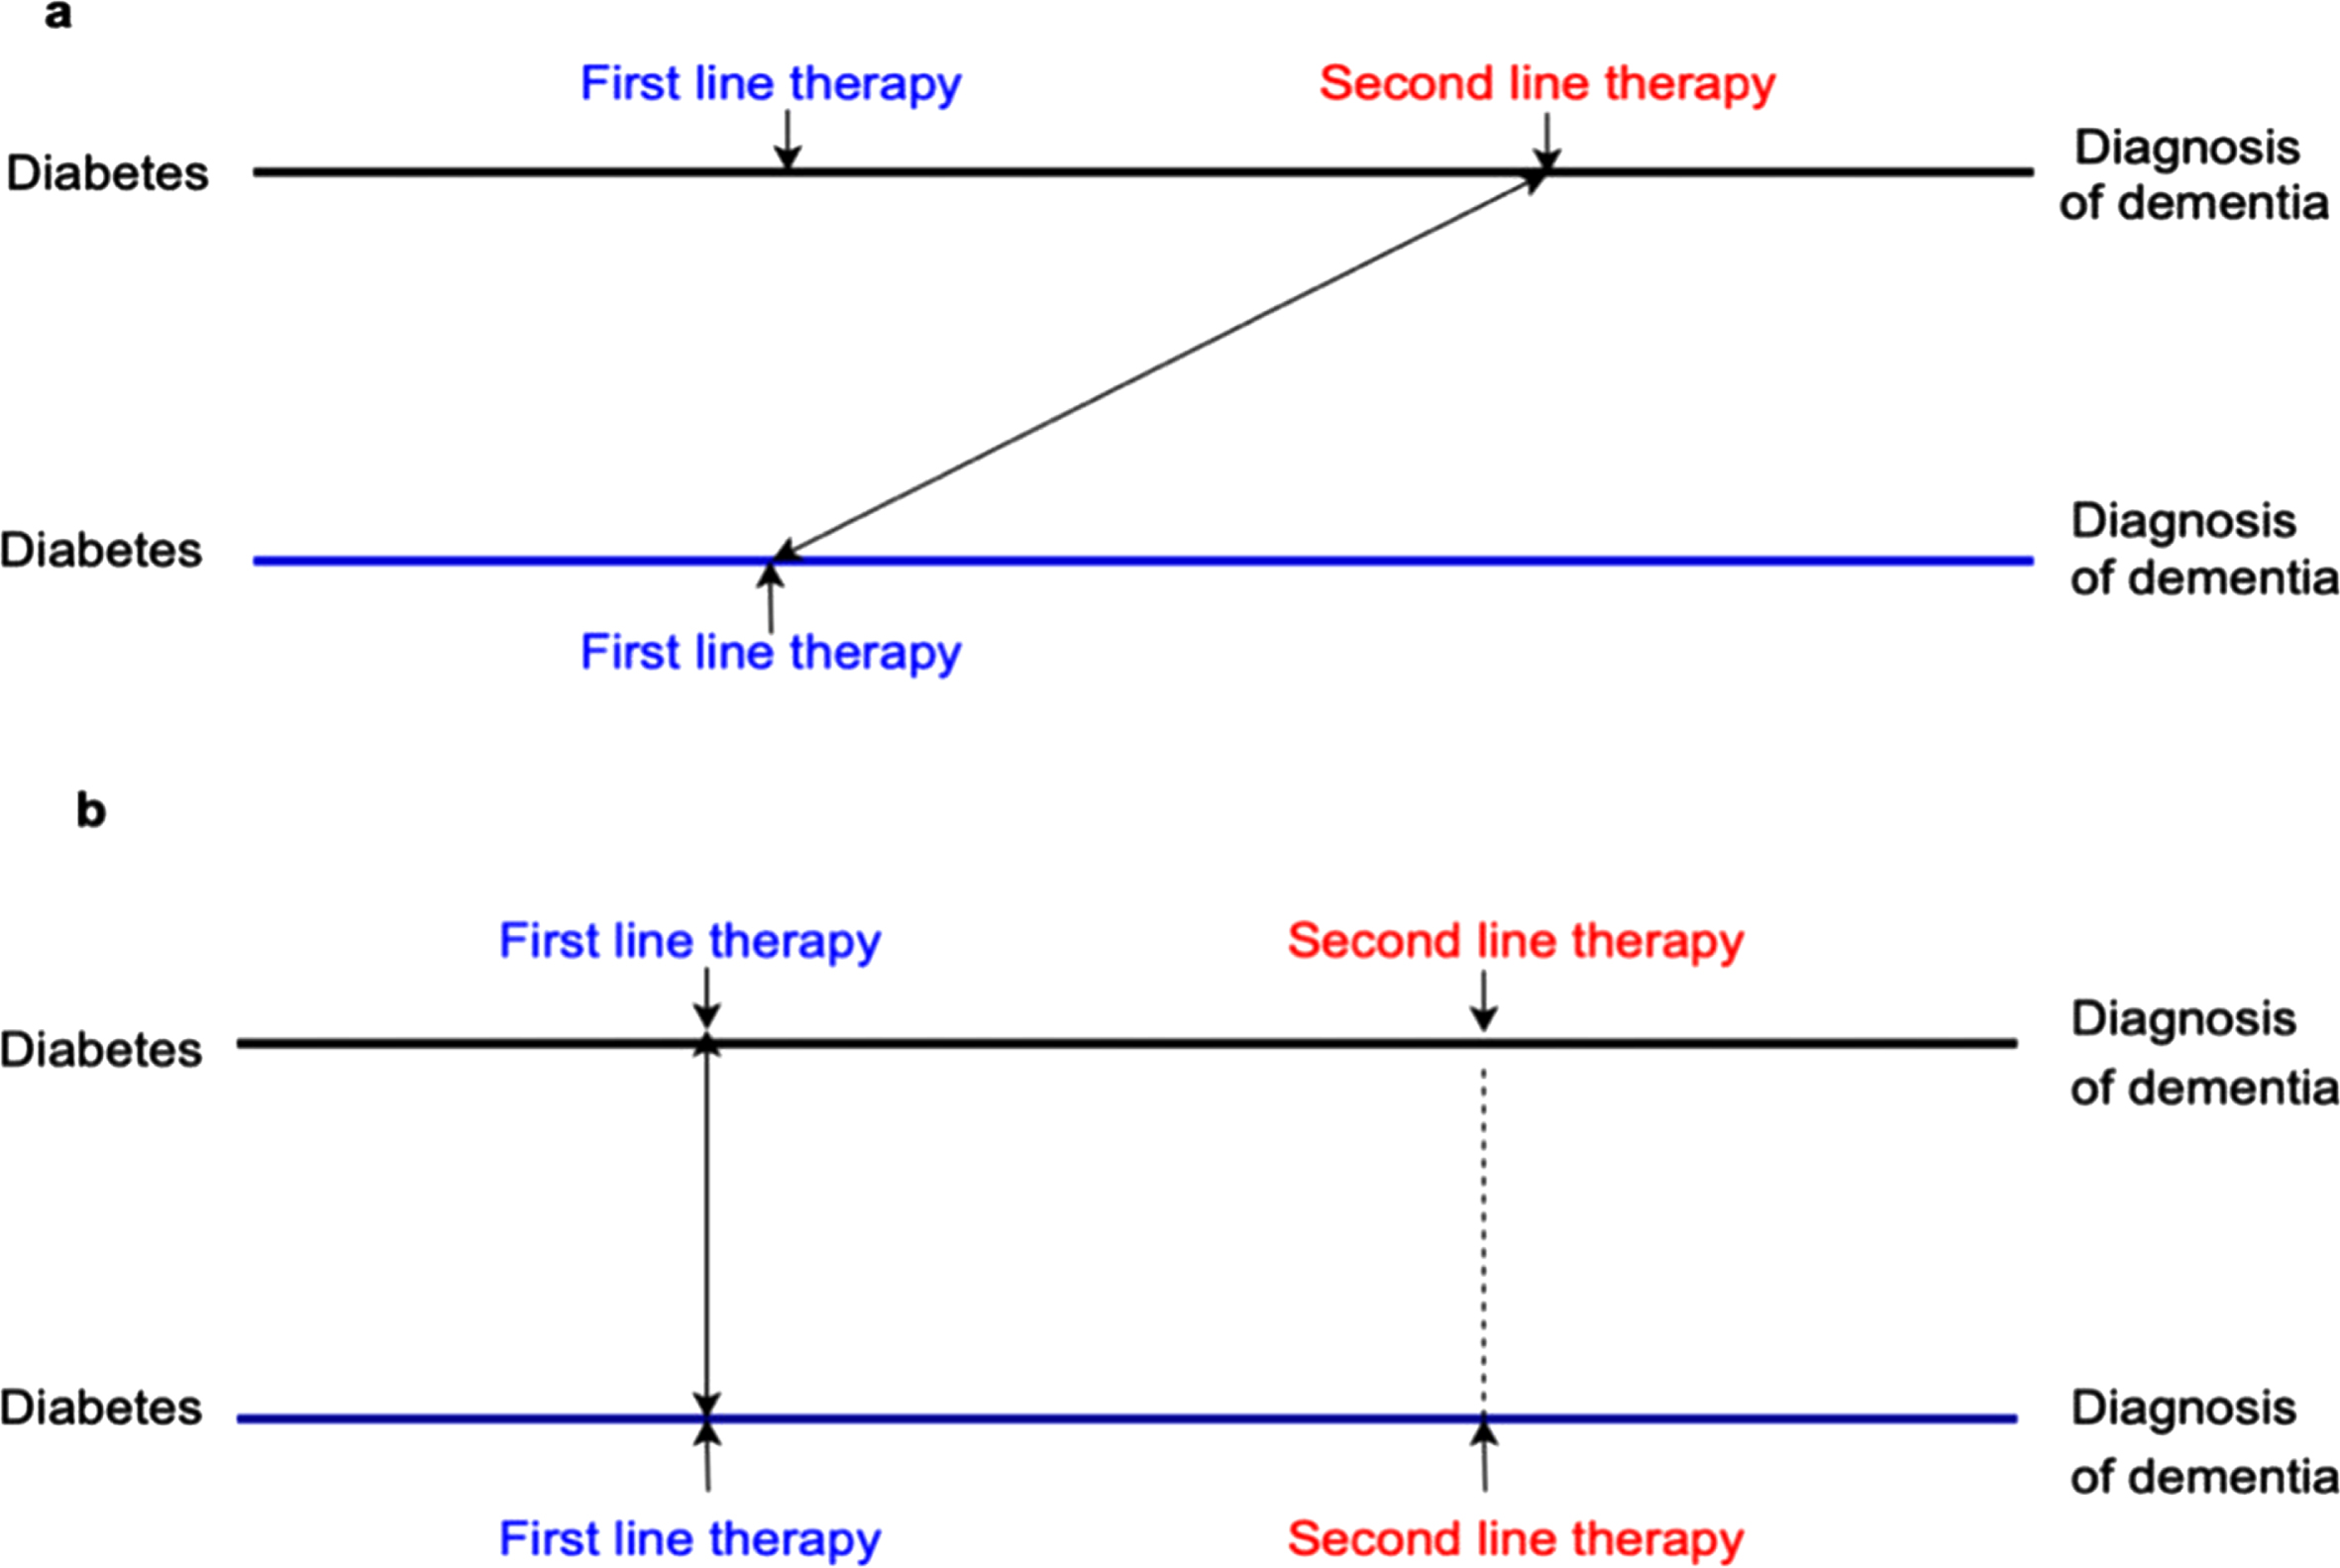 Time-lag bias. a) First-line therapy compared with second-line therapy, which implies patients who use second-line therapy can have a longer diabetes duration than those with first-line therapy. In this case, time-lag bias is likely to occur for participants with first-line therapy because longer duration of diabetes is associated with a higher risk of dementia. b) The appropriate comparison should ensure participants in metformin and non-metformin therapies are on a similar stage of diabetes.